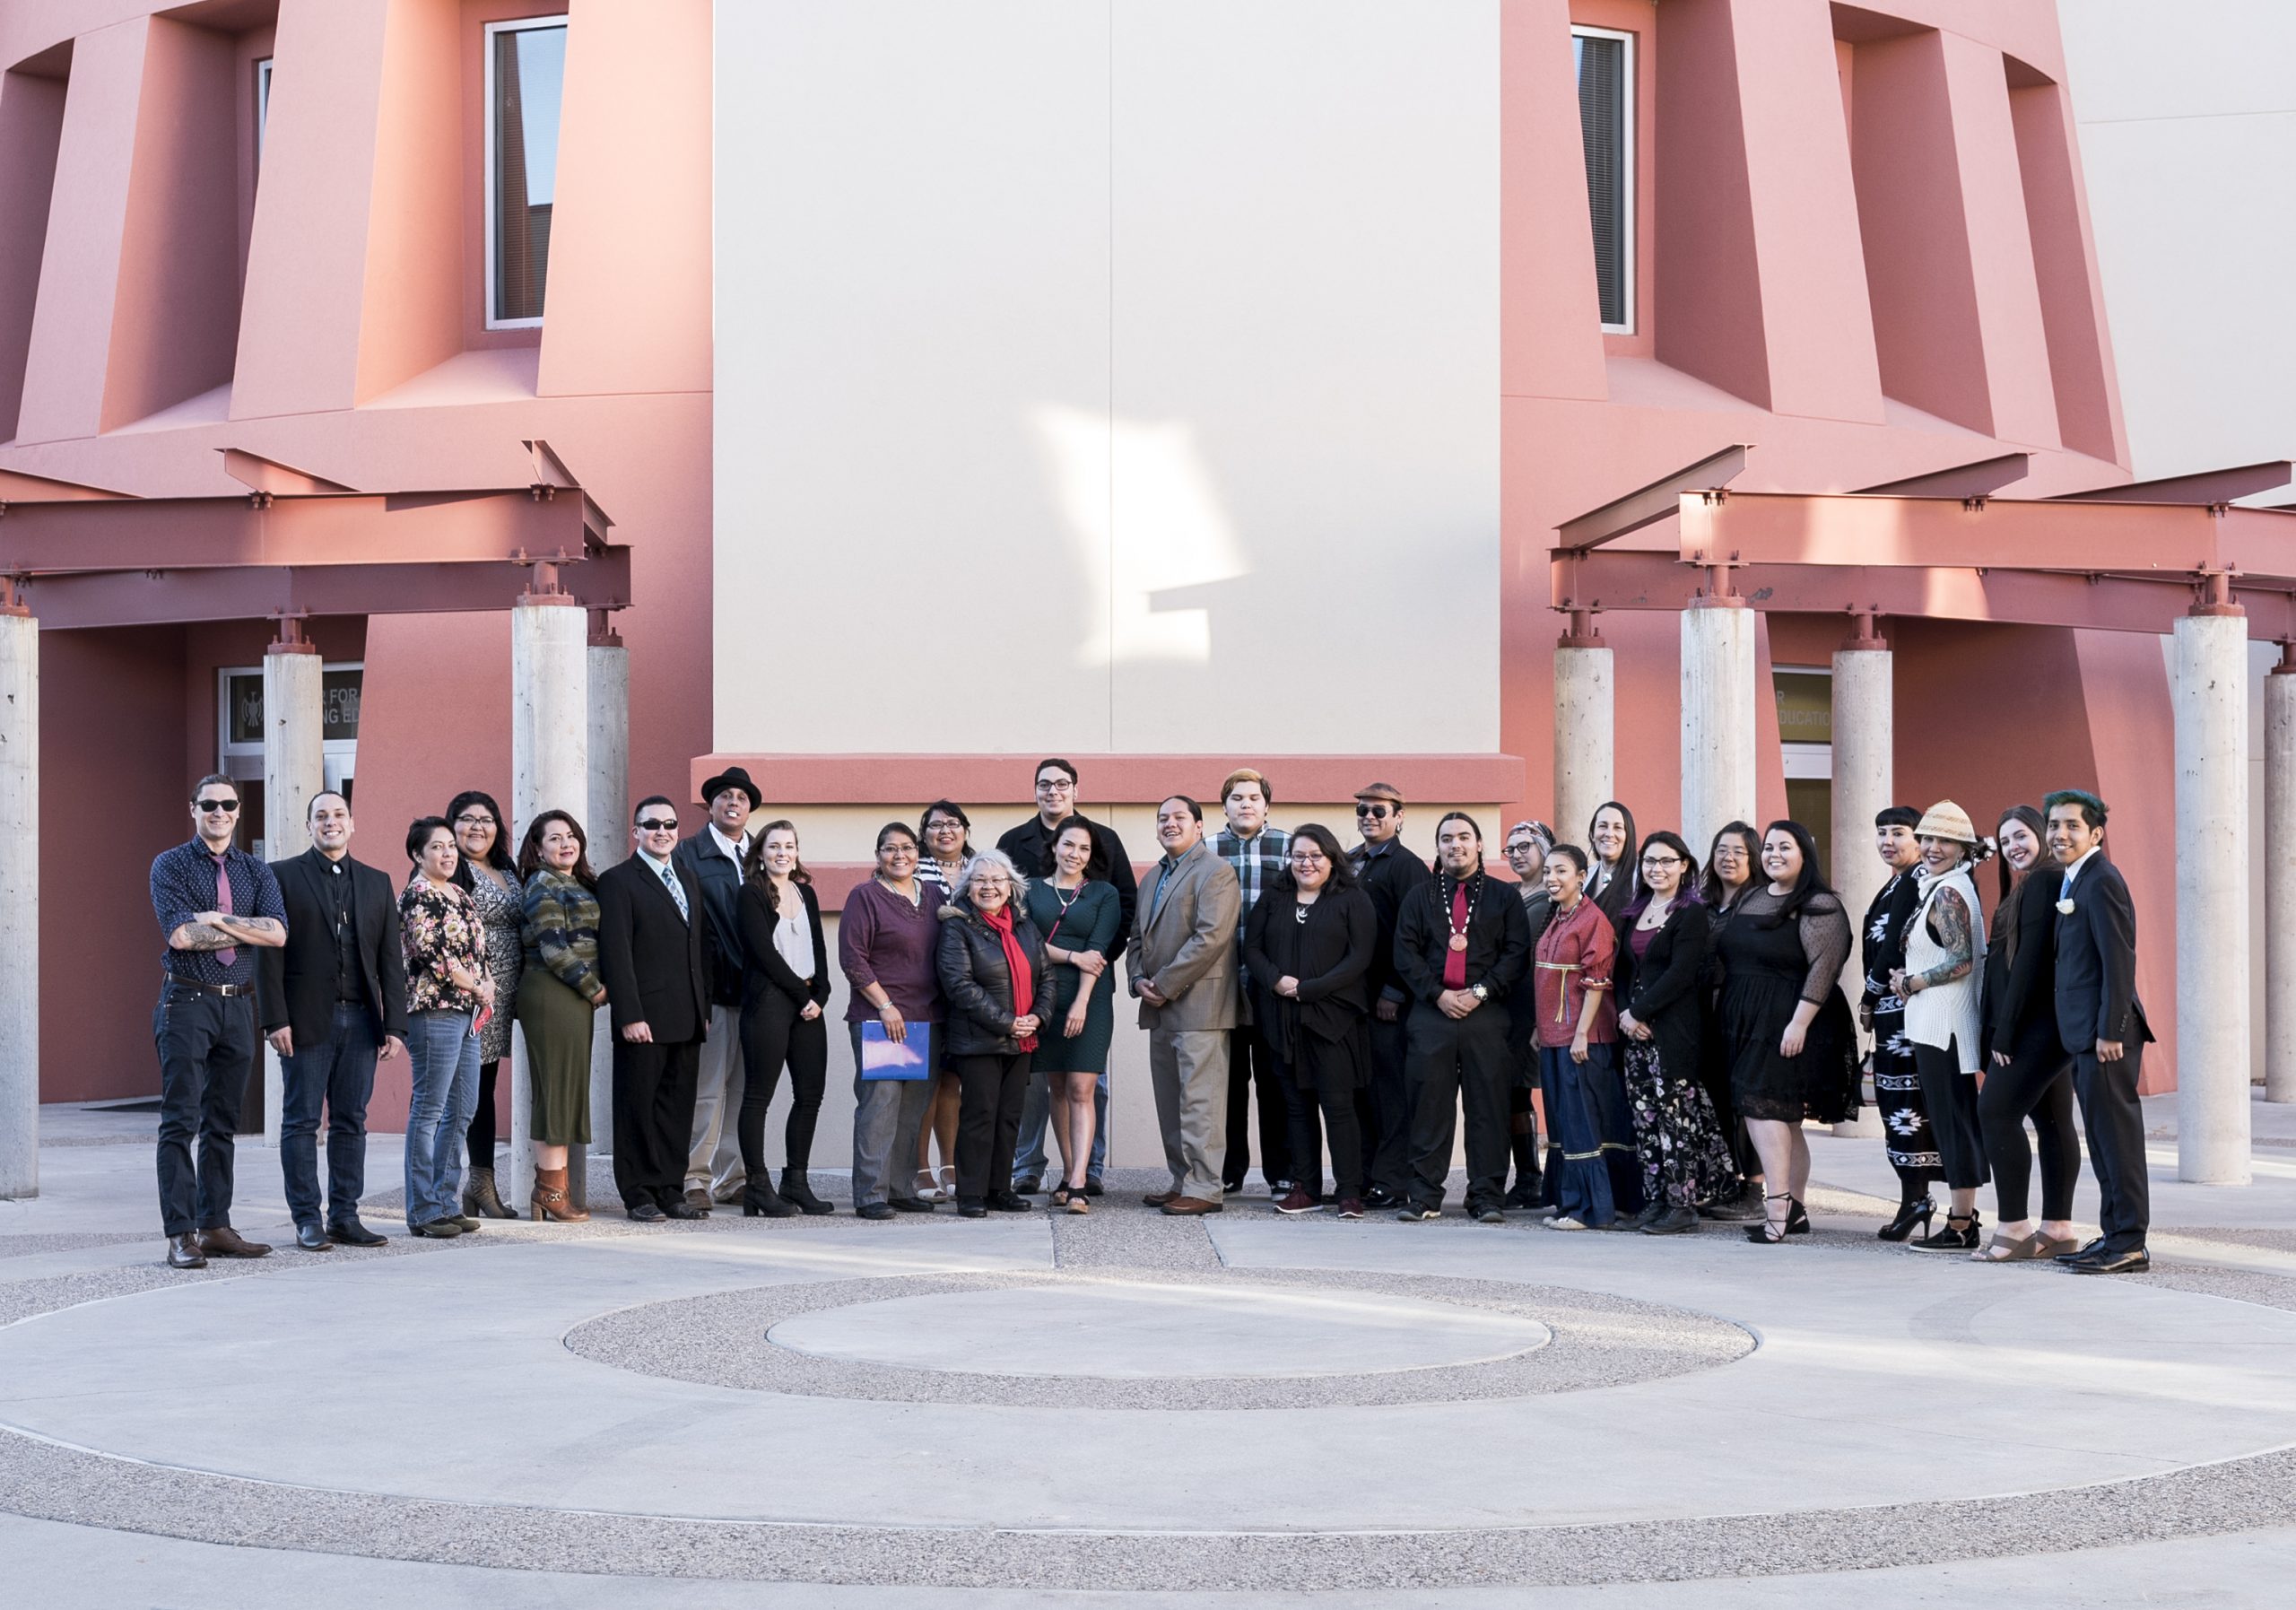 The honorees pose for a group photo at the IAIA Campus in Santa Fe, NM